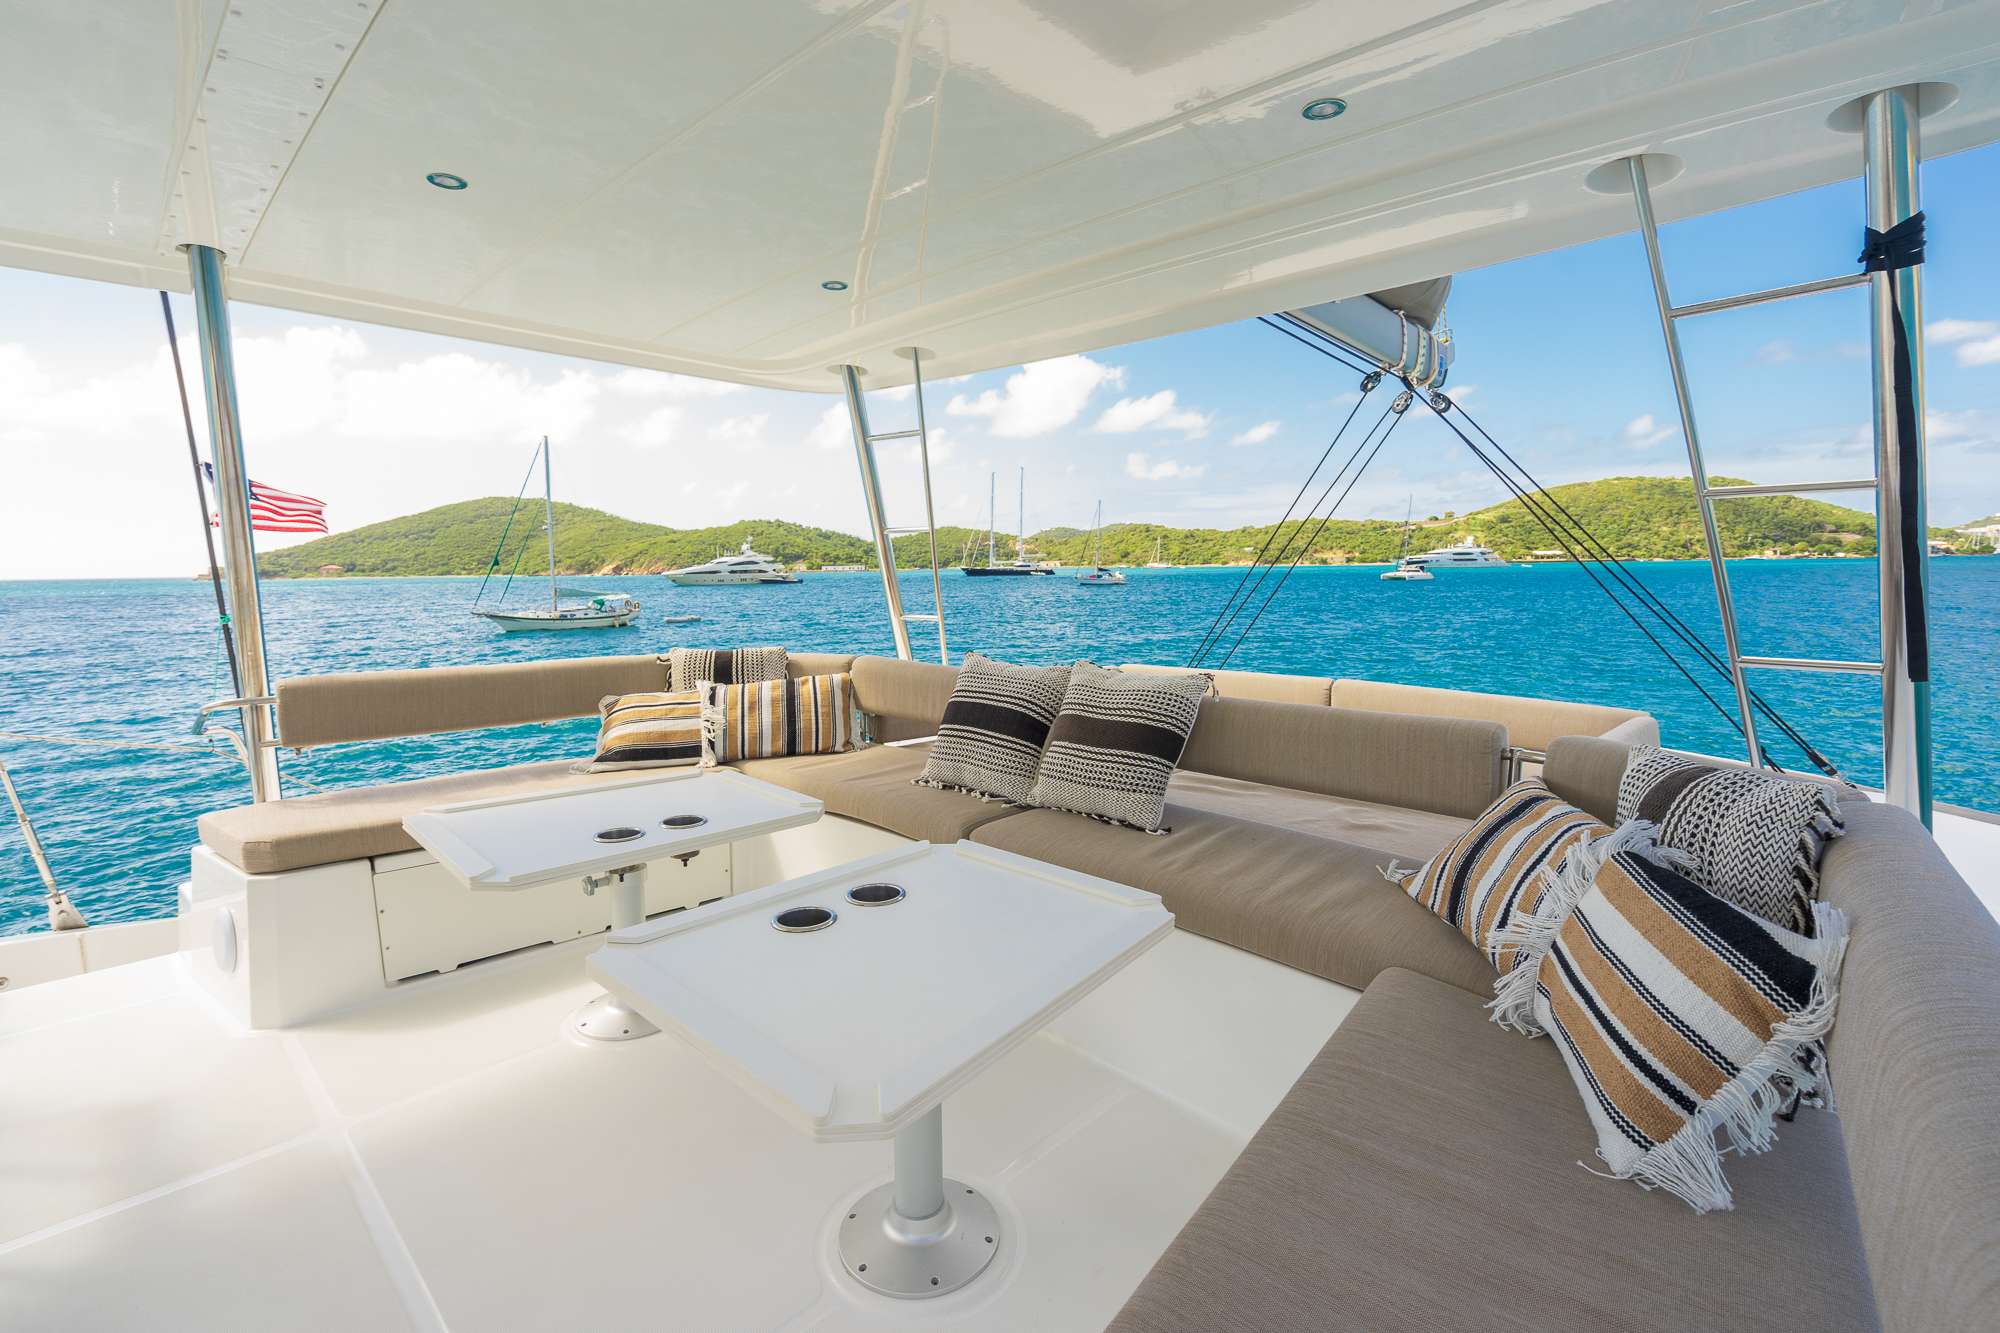 Soul Mates Yacht Charter - Foredeck lounge area